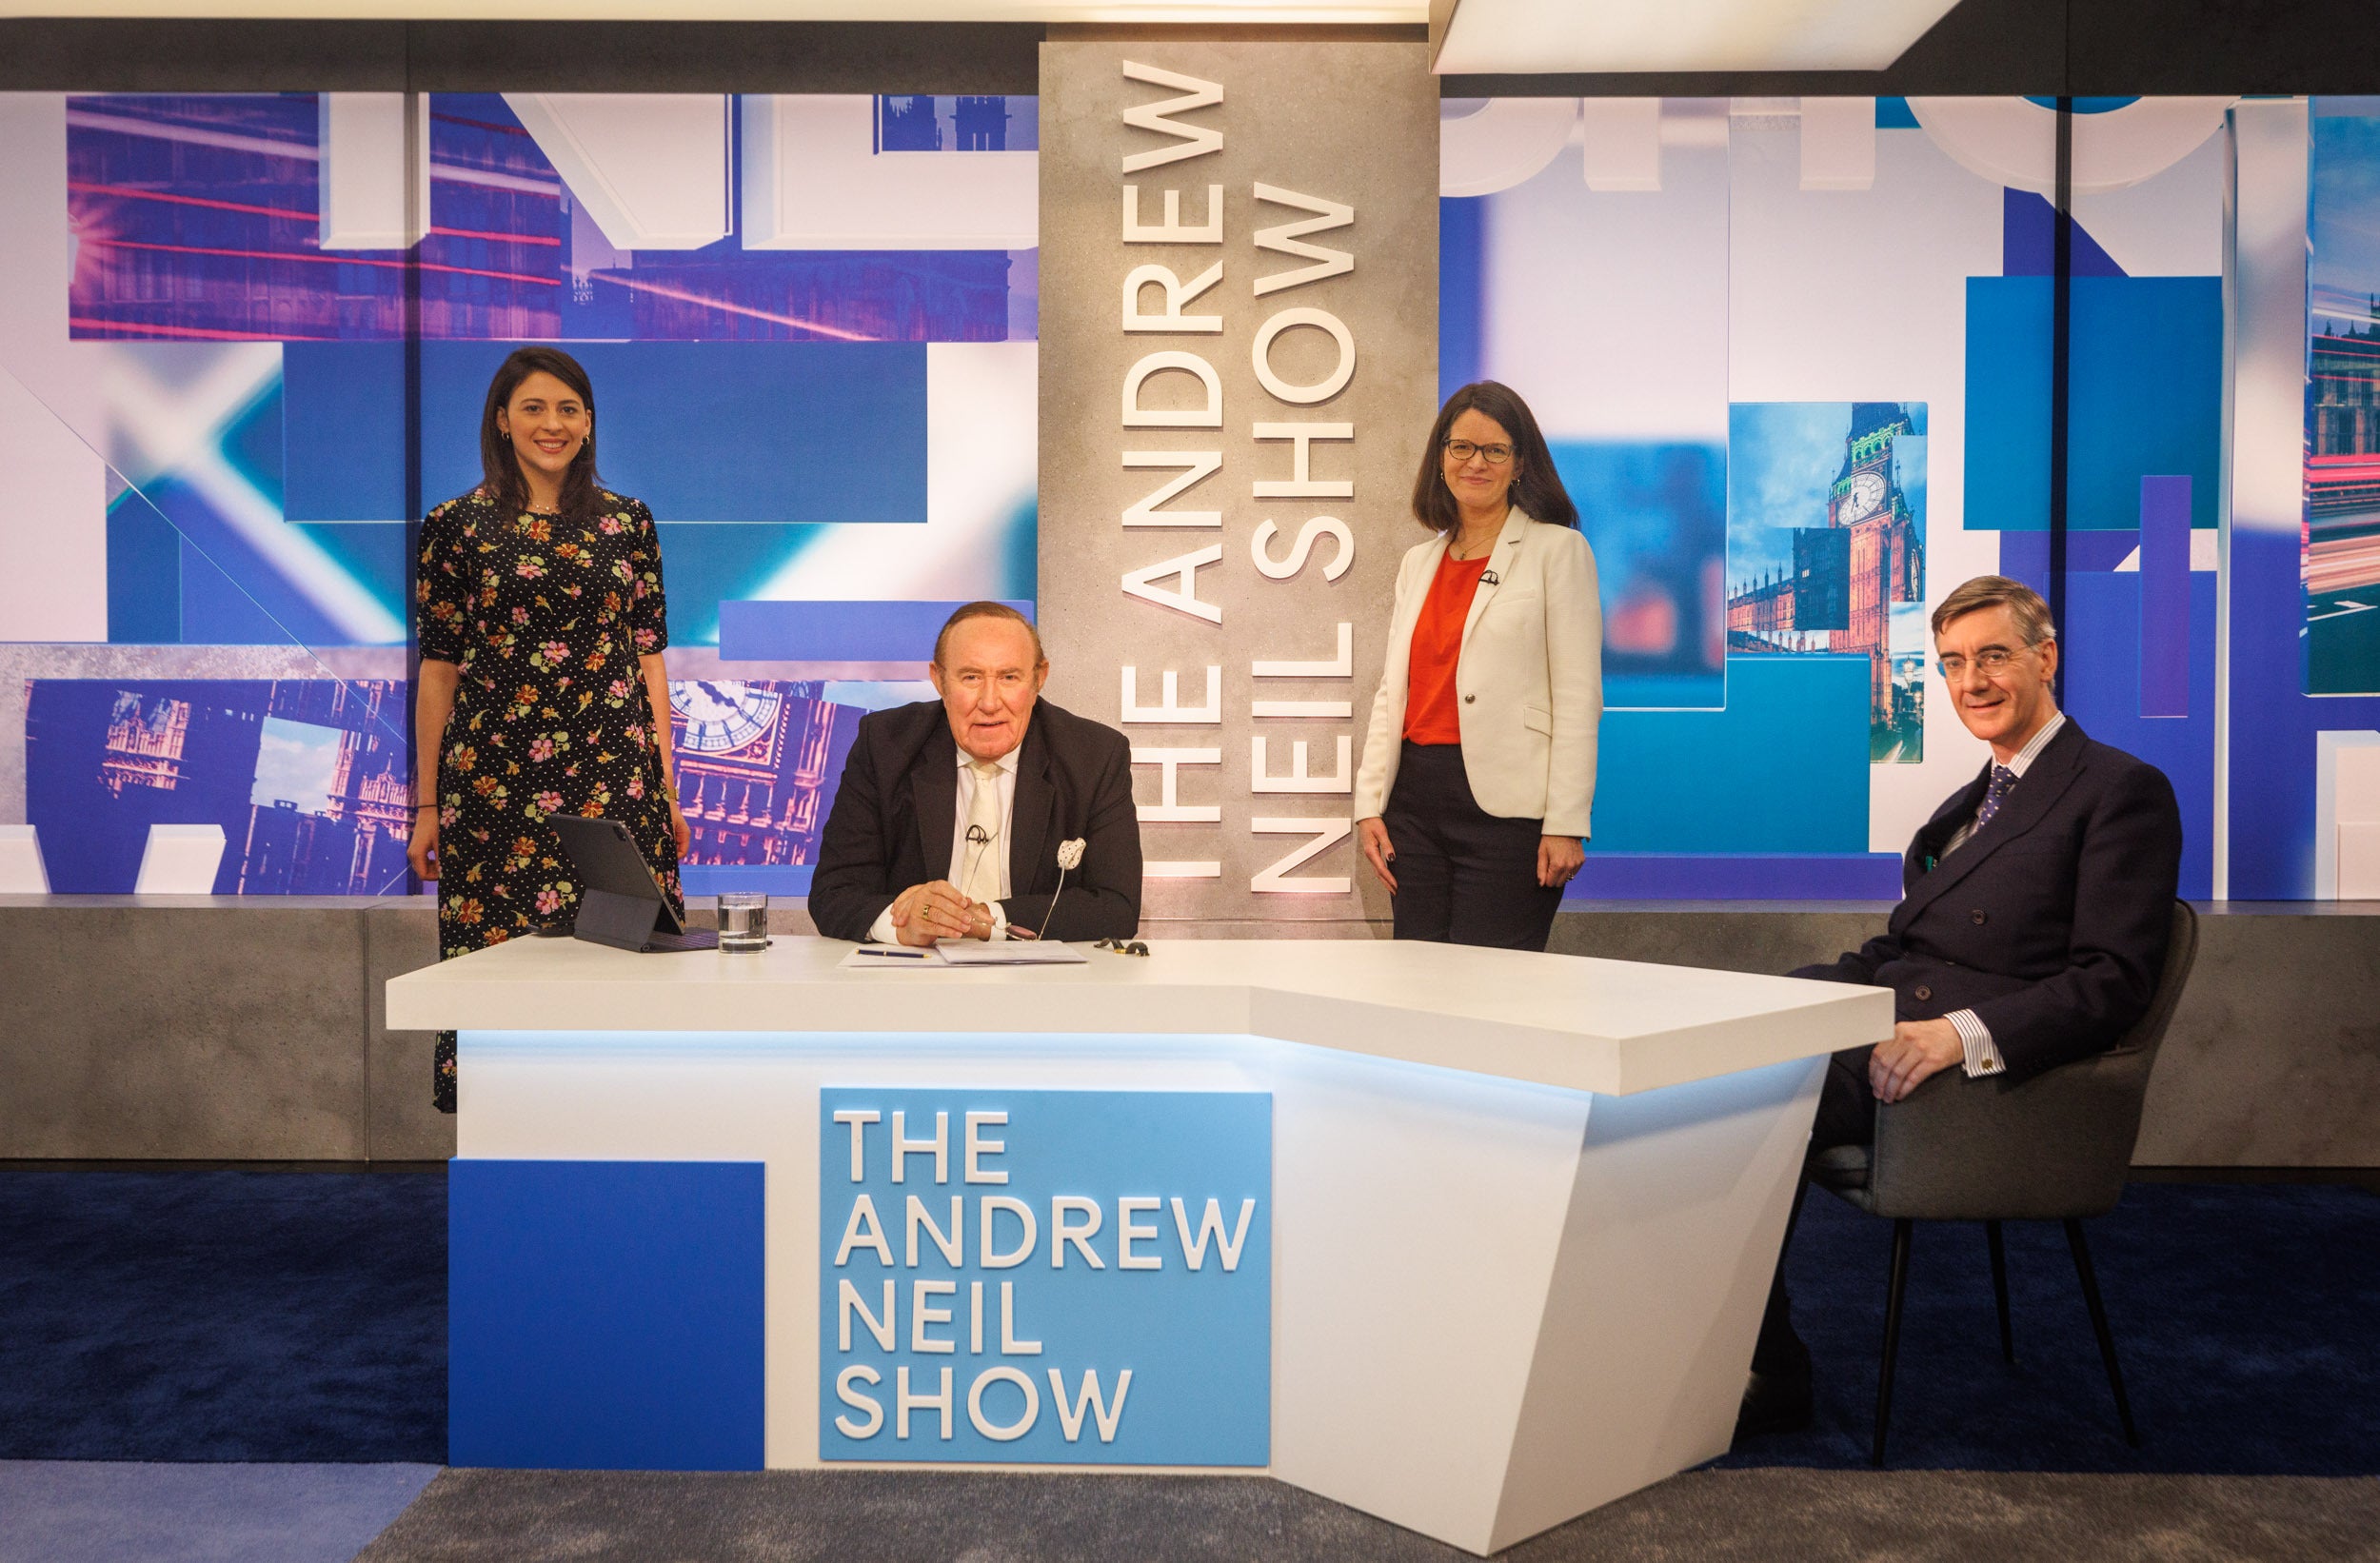 The Andrew Neil Show first launched in May on Channel 4 (Channel 4/PA)